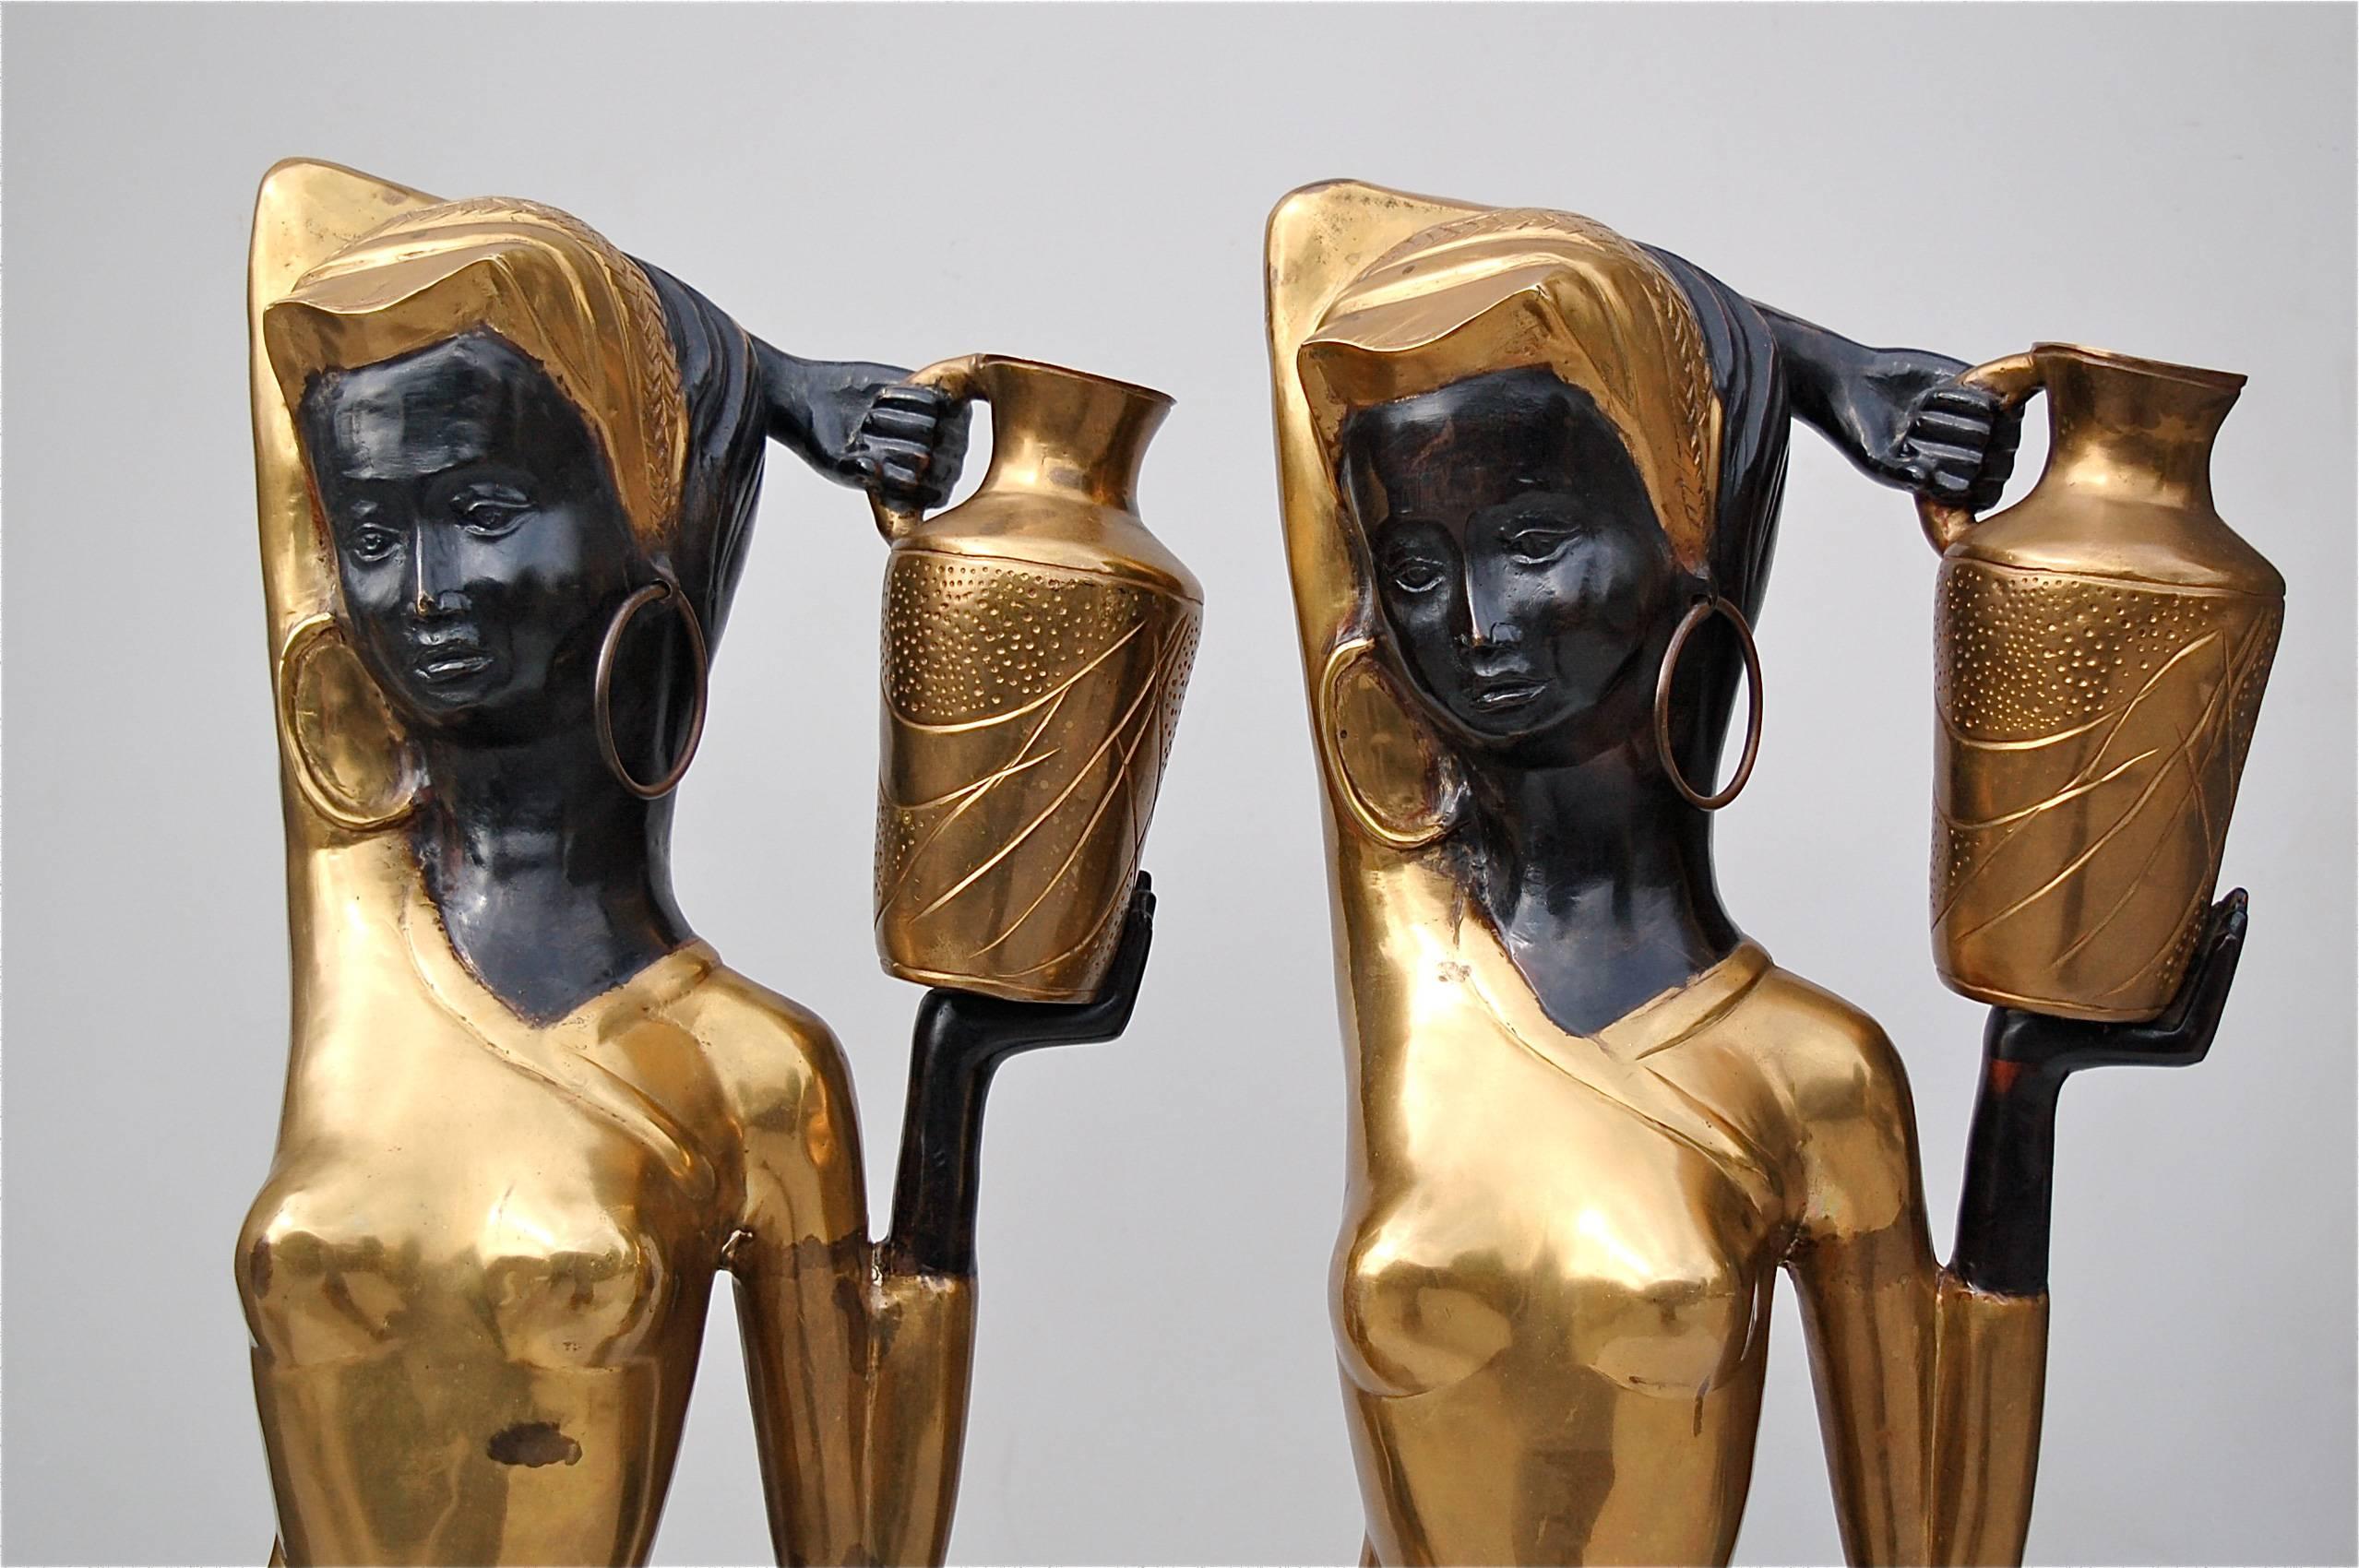 Highly decorative, two-tone floor sculptures of two African females in striking pose. The garments have a gold colored finish and are draped in such a way to accentuate each shapely curve of their bodies. It's a more contemporary interpretation of a